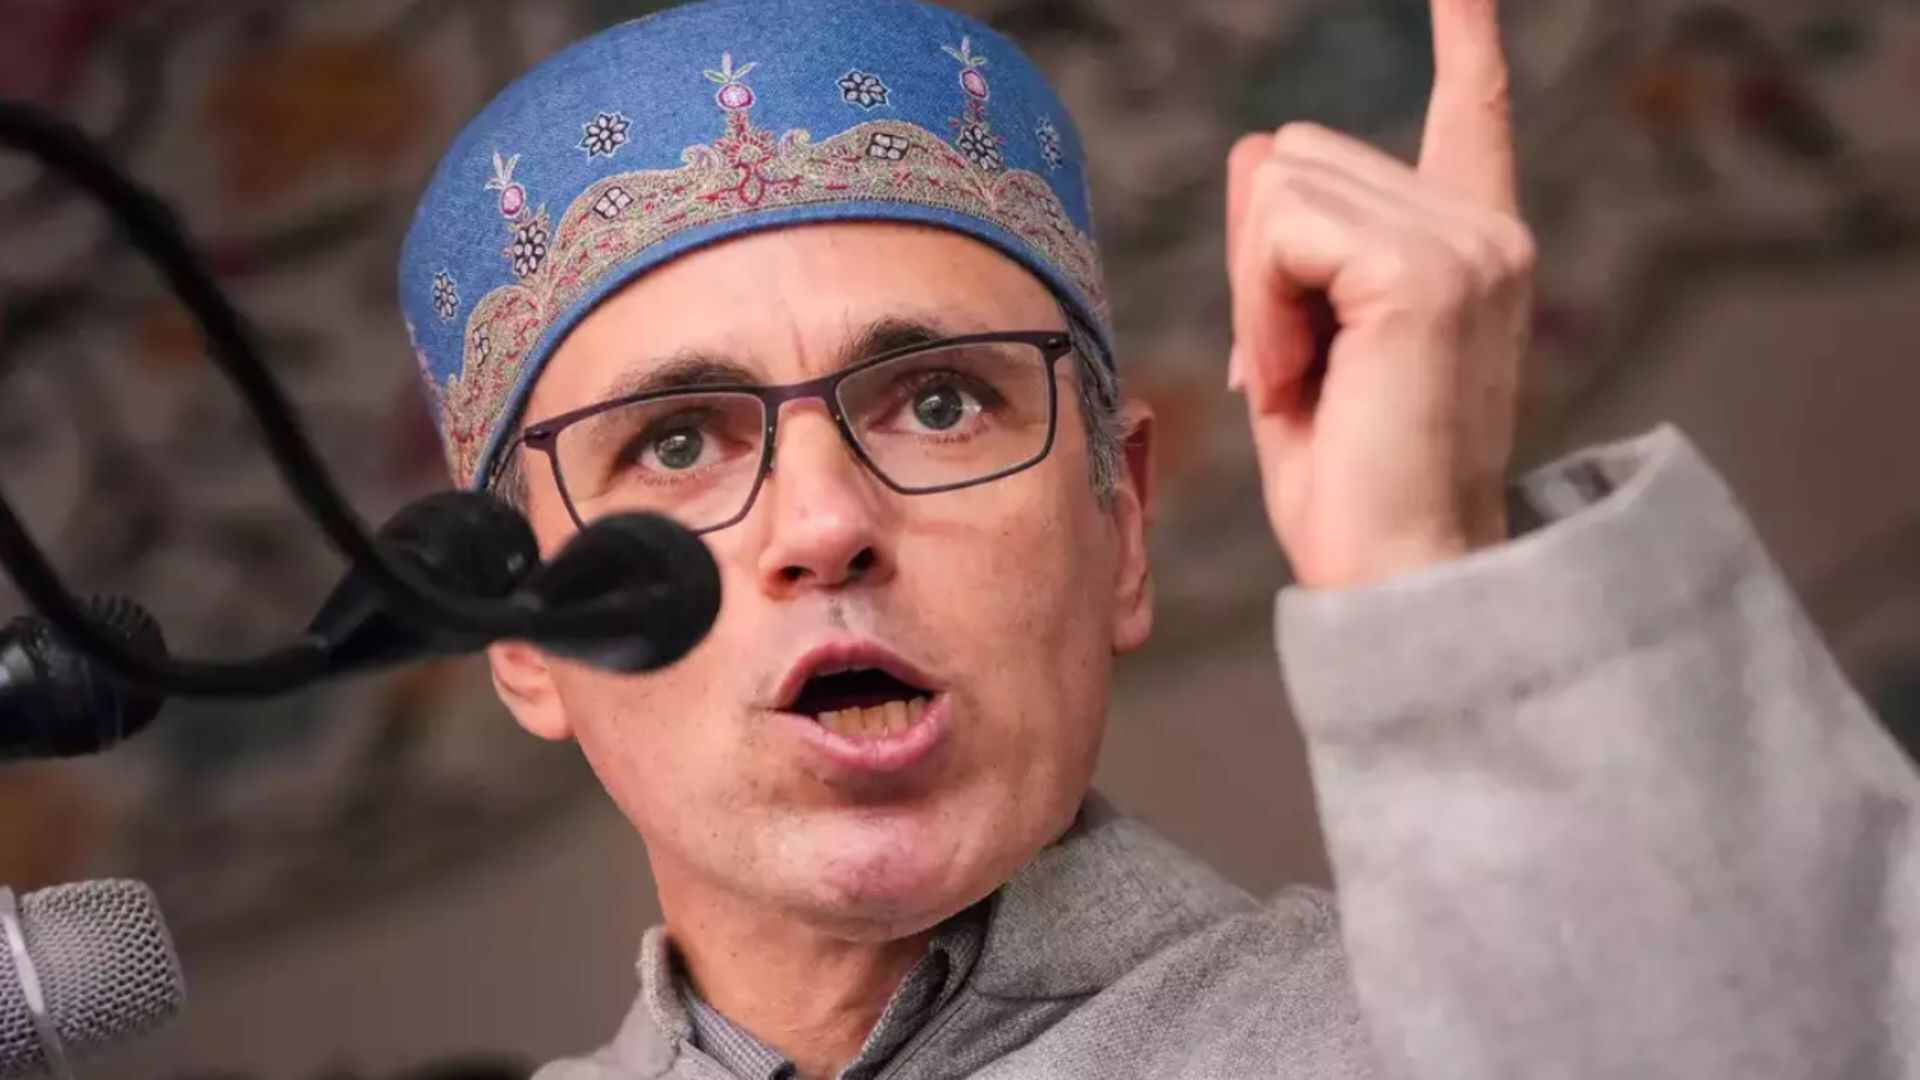 Omar Abdullah Urges Government to Hold Timely Elections in J&K, Challenges Security Narrative